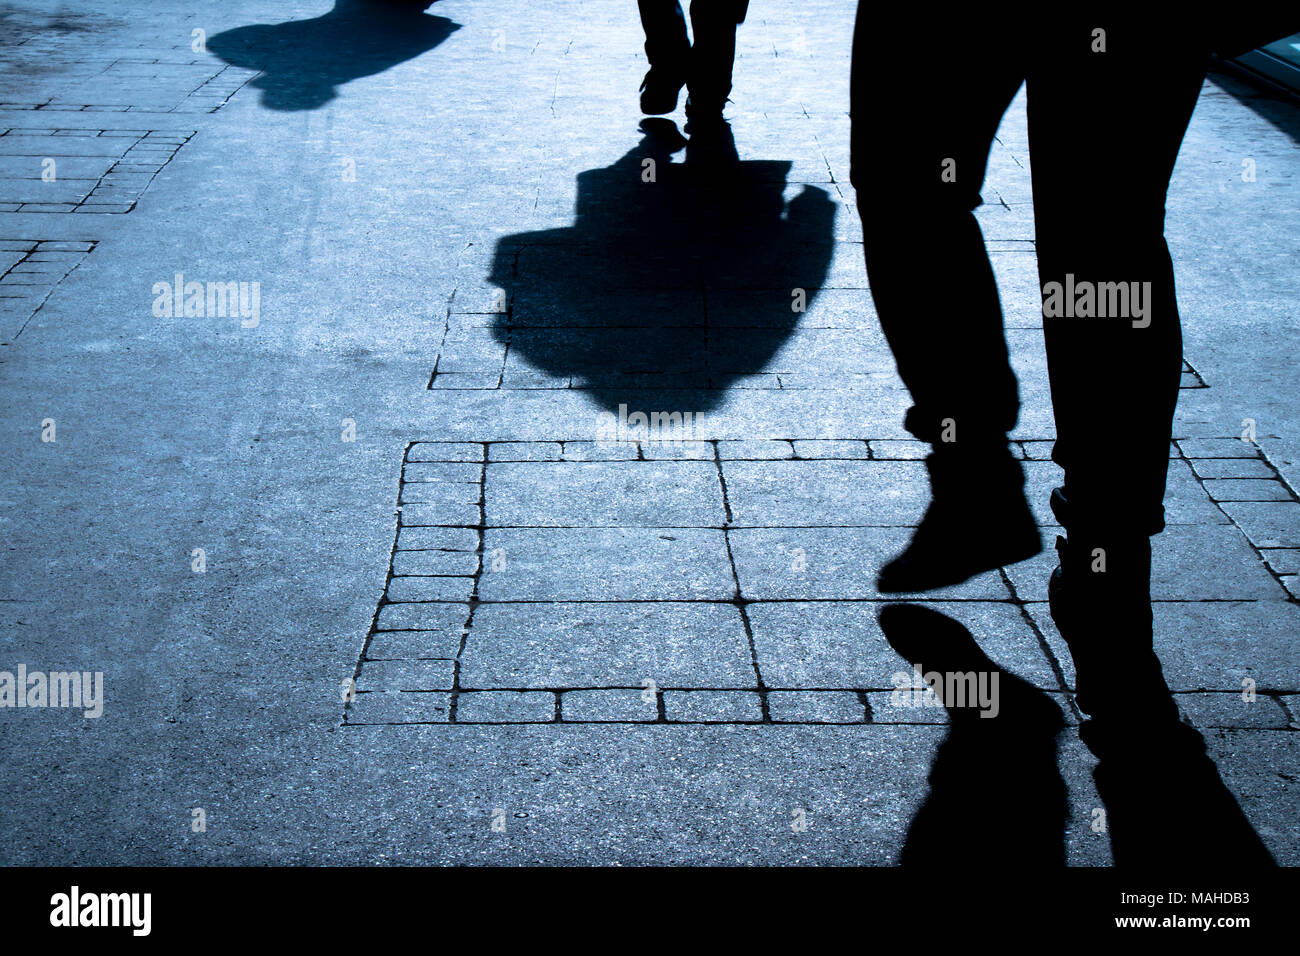 Silhouette shadows of three people walking alone on city street in the night Stock Photo